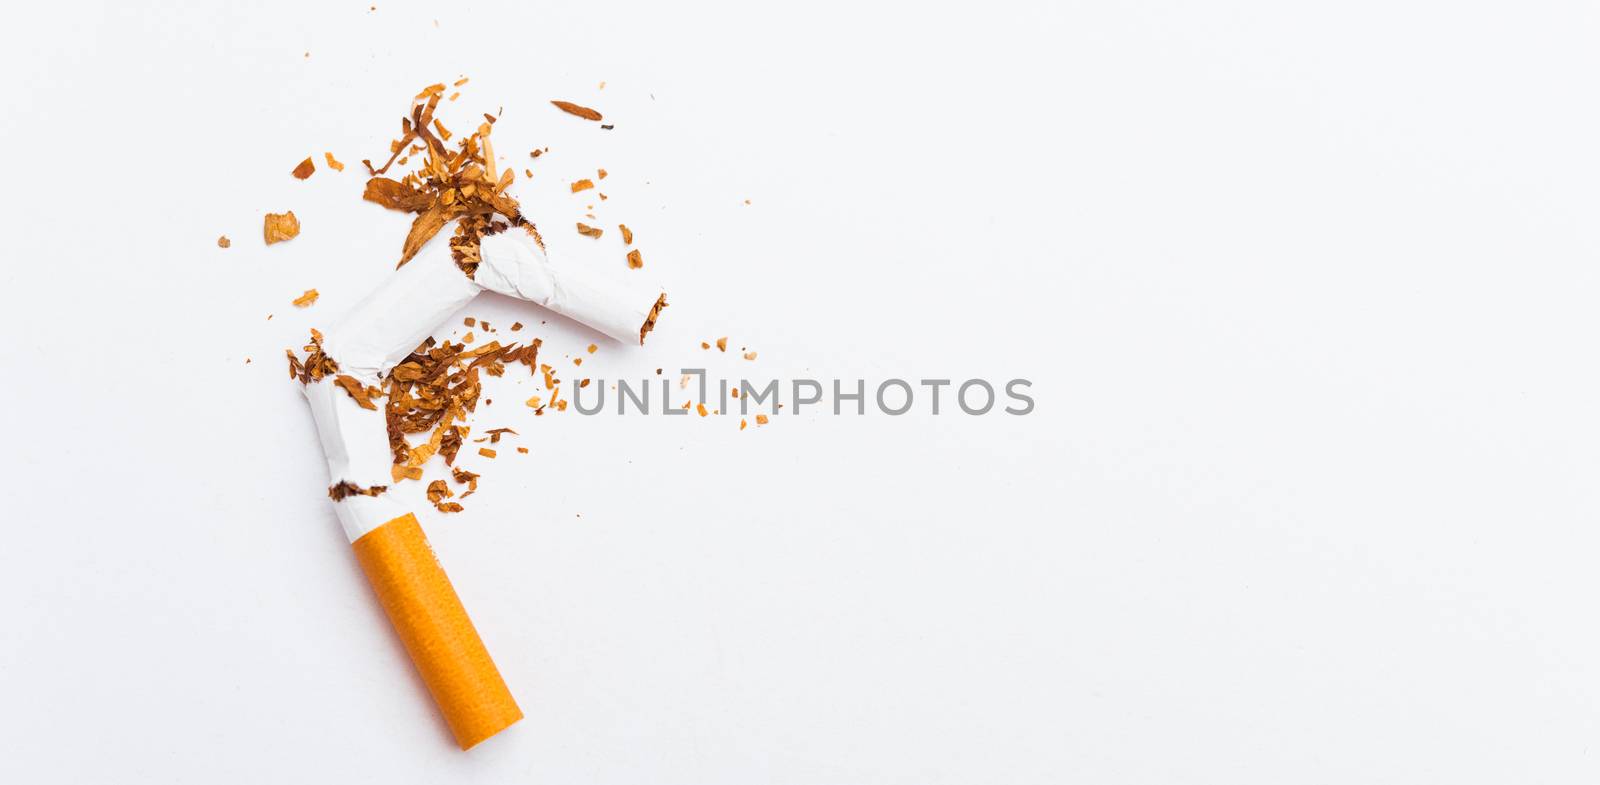 31 May of World No Tobacco Day, no smoking, close up of broken pile cigarette or tobacco STOP symbolic on white background with banner copy space, and Warning lung health concept